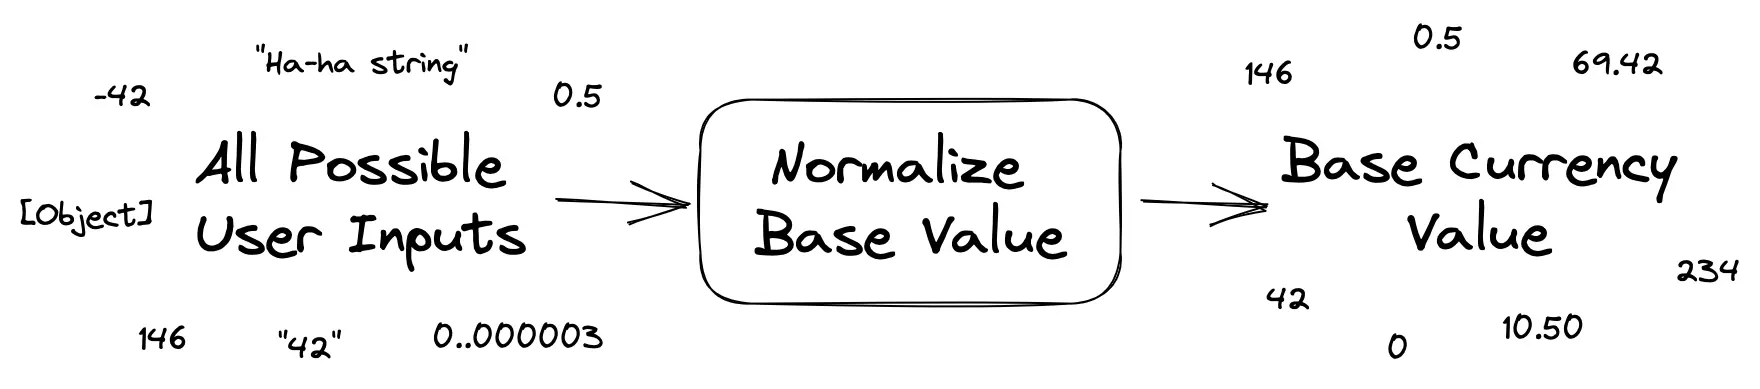 We narrow down the set of all possible values to a limited set of values that are valid in our subject area